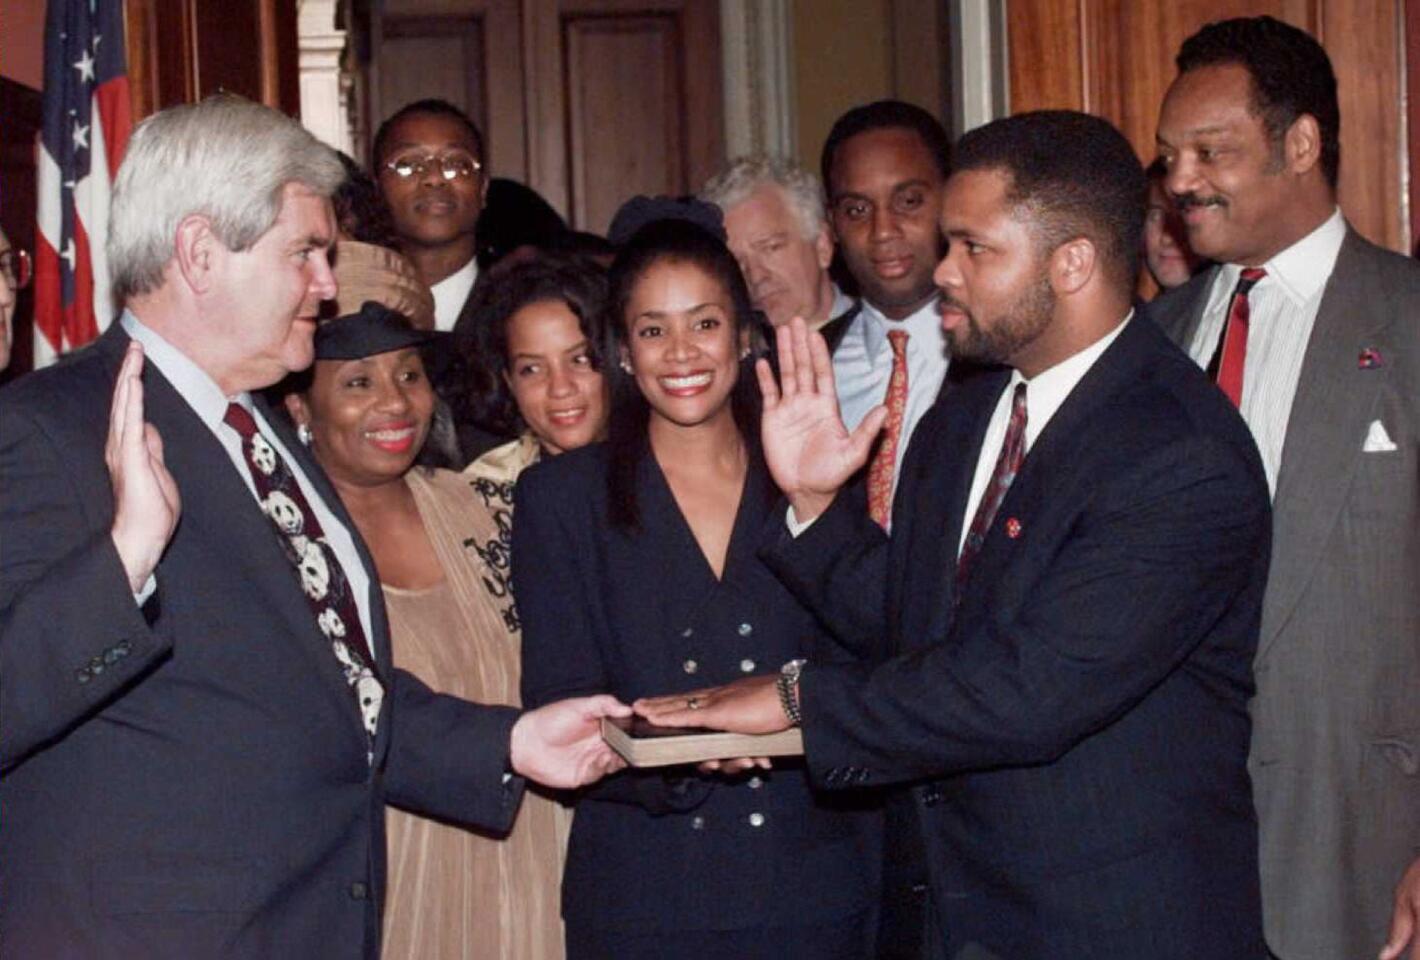 Speaker of the House Newt Gingrich, left, re-enacts the swearing-in of the newest member of Congress, Jesse Jackson Jr. (R), D-IL. on Dec. 14, 1995. In the background are congressmen Jackson's mother, Jackie, his wife Sandri, center, and his father, civil rights leader the Rev. Jesse Jackson.